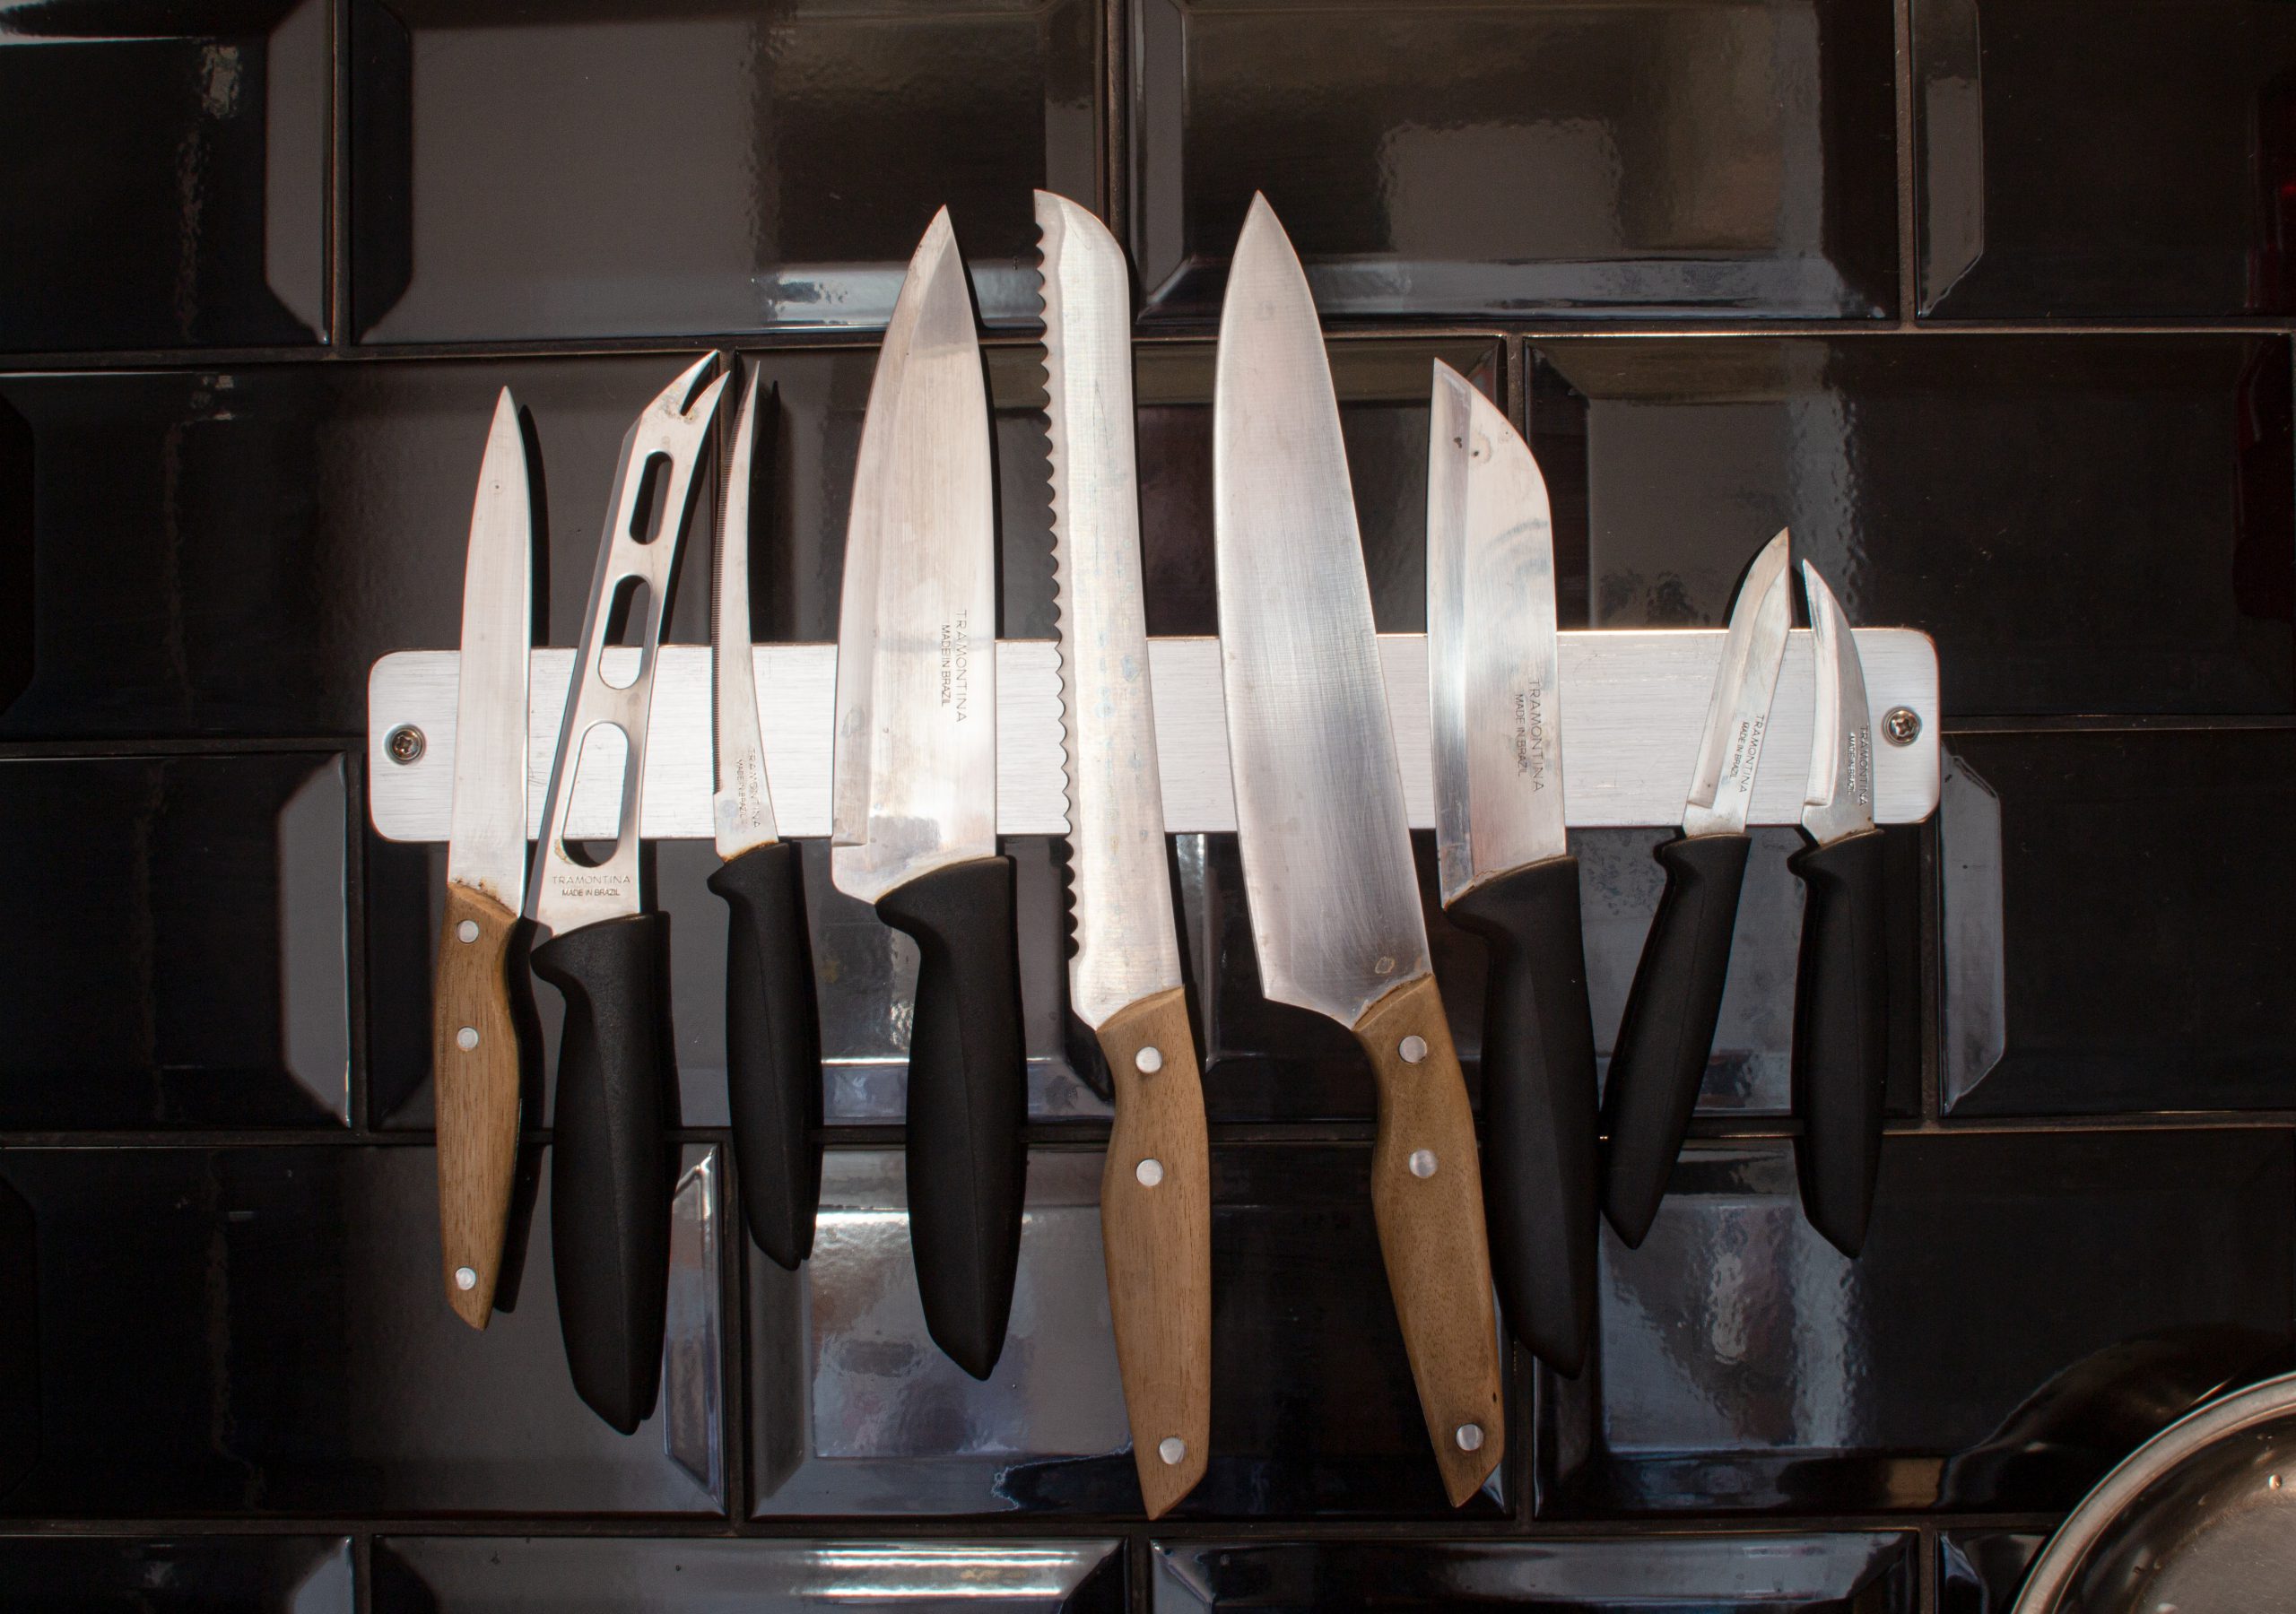 How to Store Your Knives